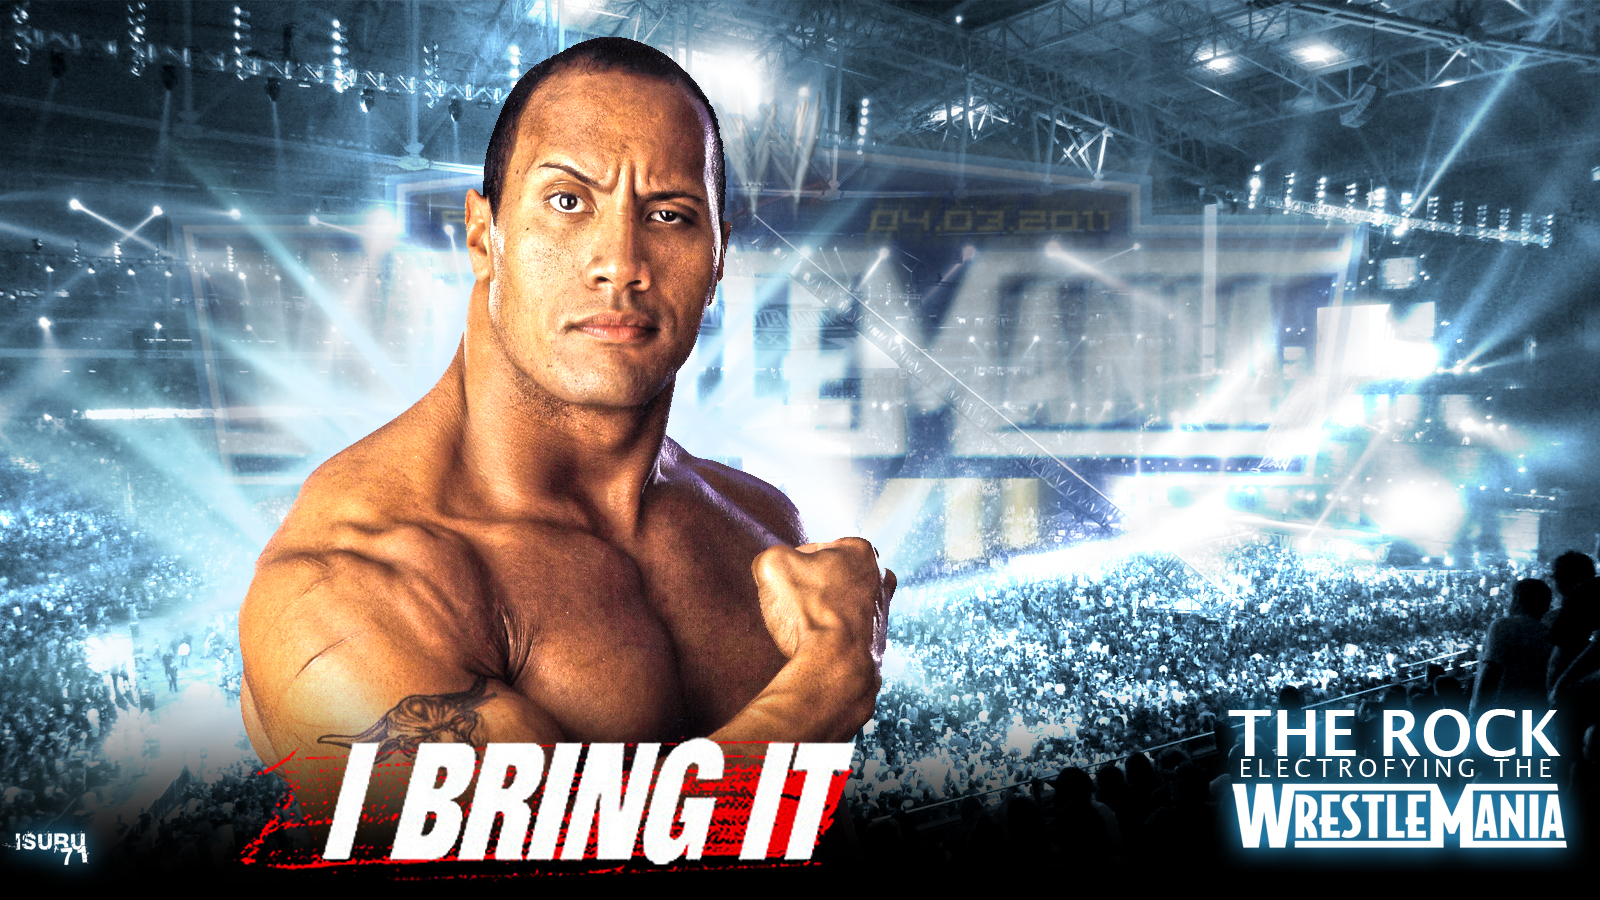 WWE Wallpaper The Rock 2K wallpapers and backgrounds photos